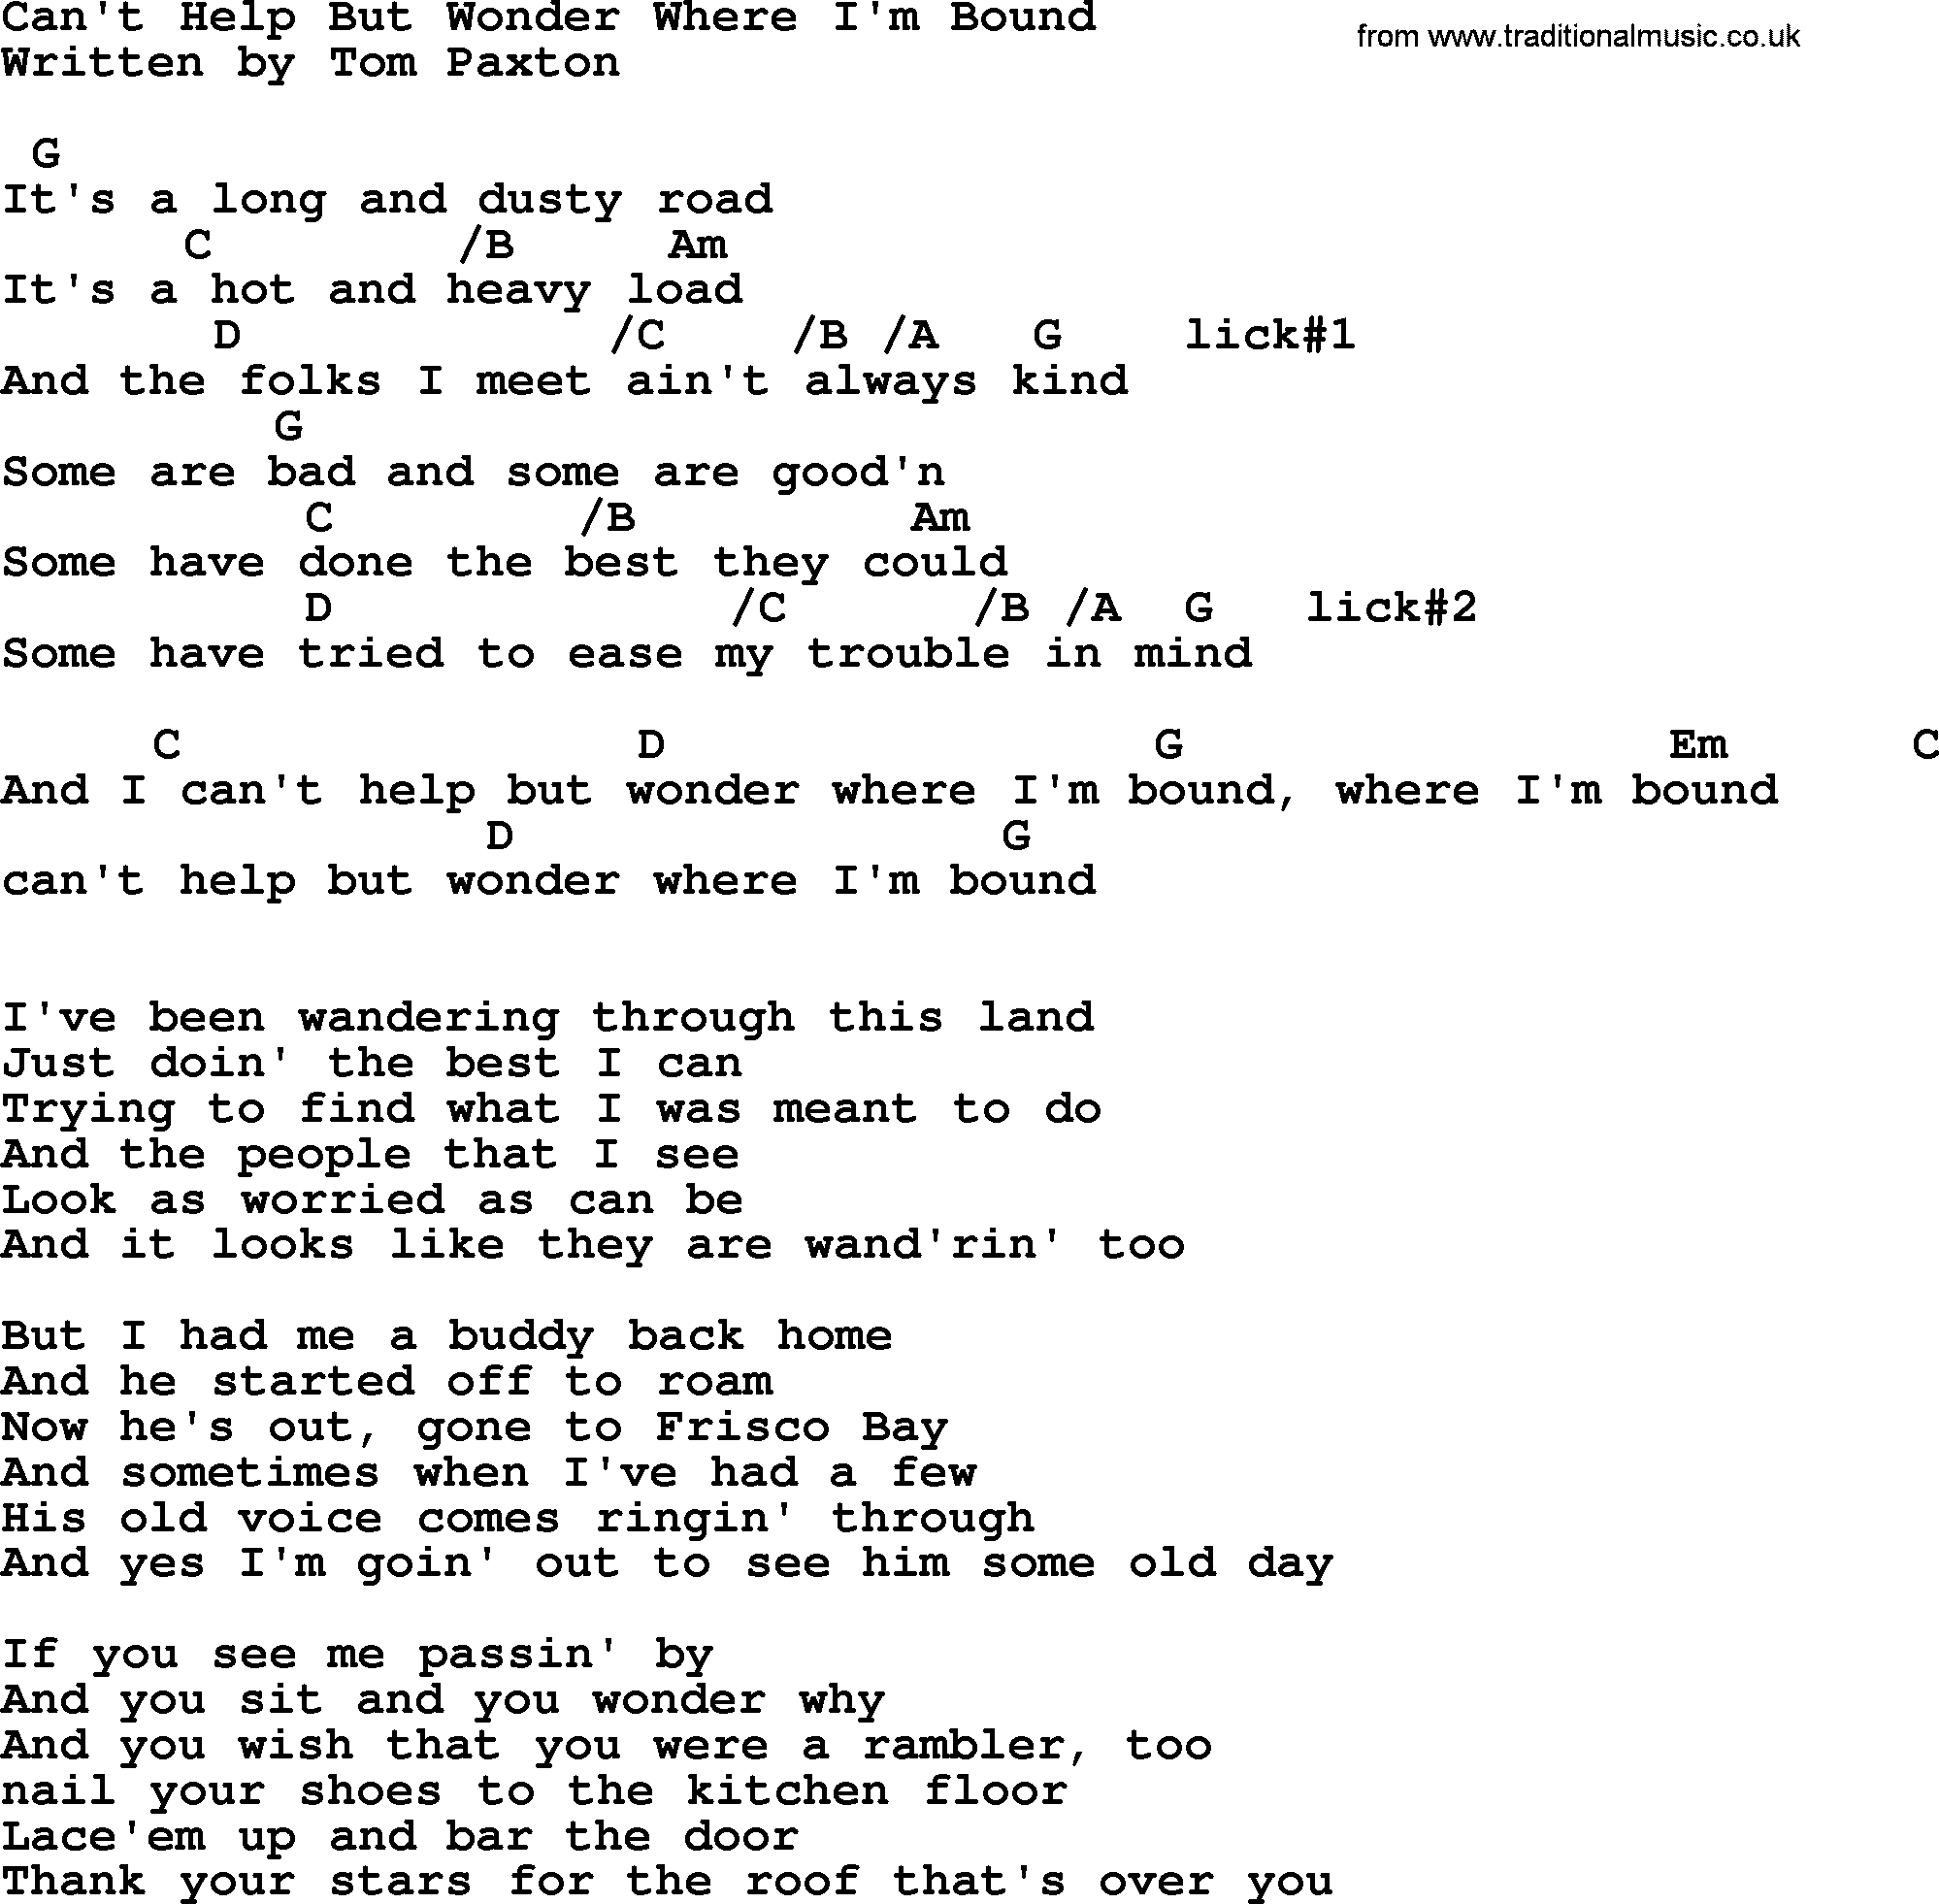 Top 1000 Most Popular Folk and Old-time Songs: Can't Help But Wonder Where I'm Bound, lyrics and chords